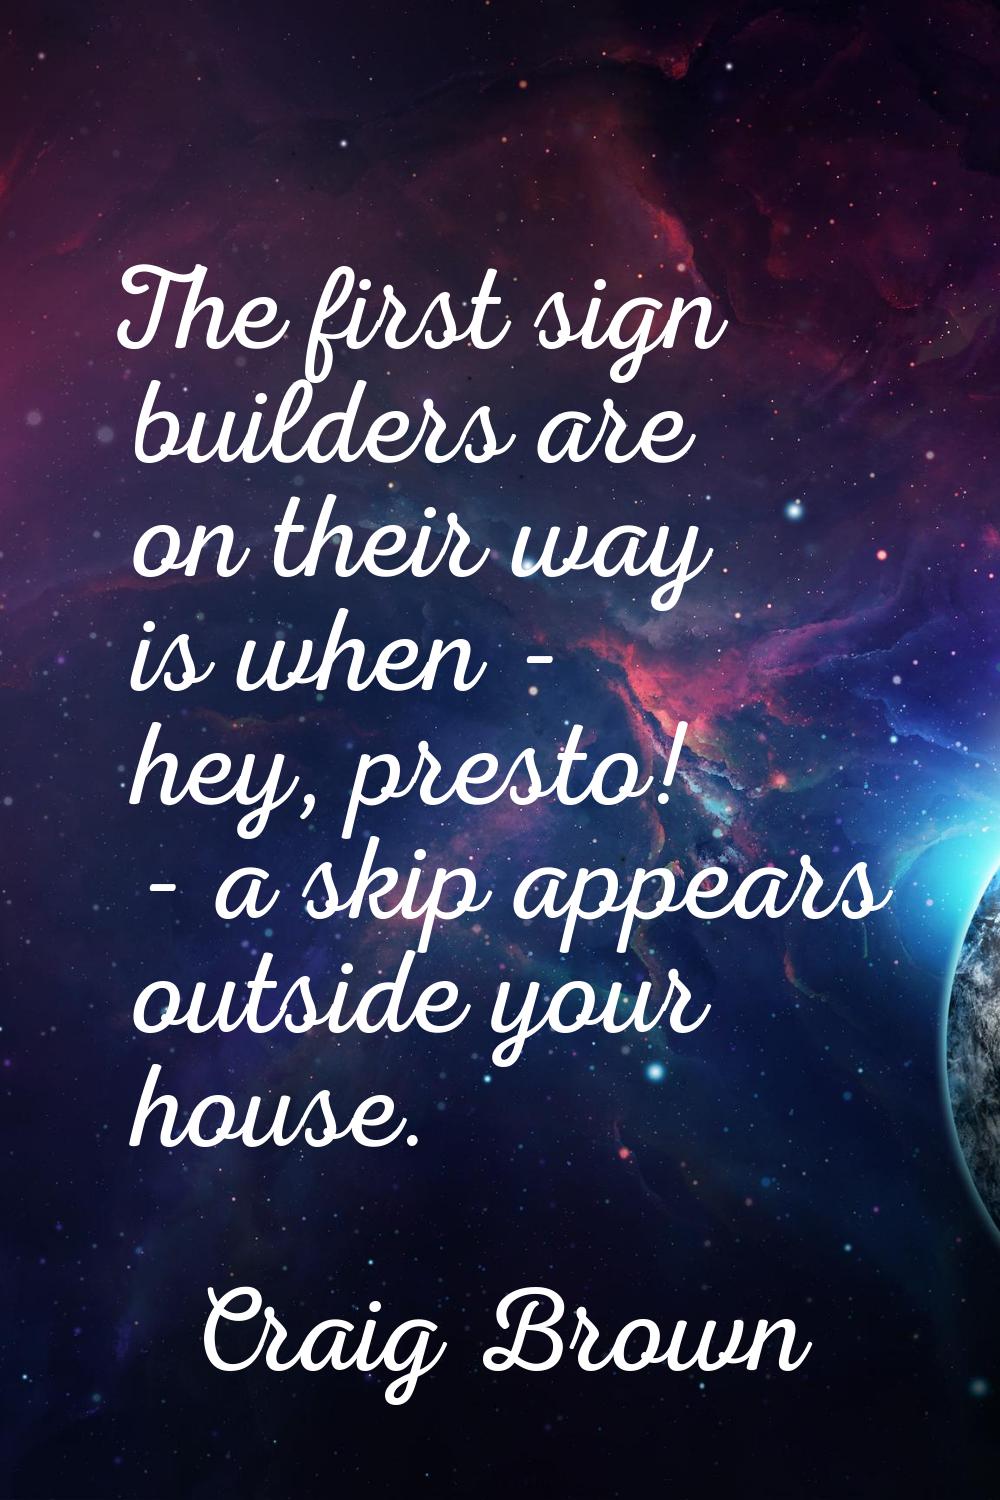 The first sign builders are on their way is when - hey, presto! - a skip appears outside your house